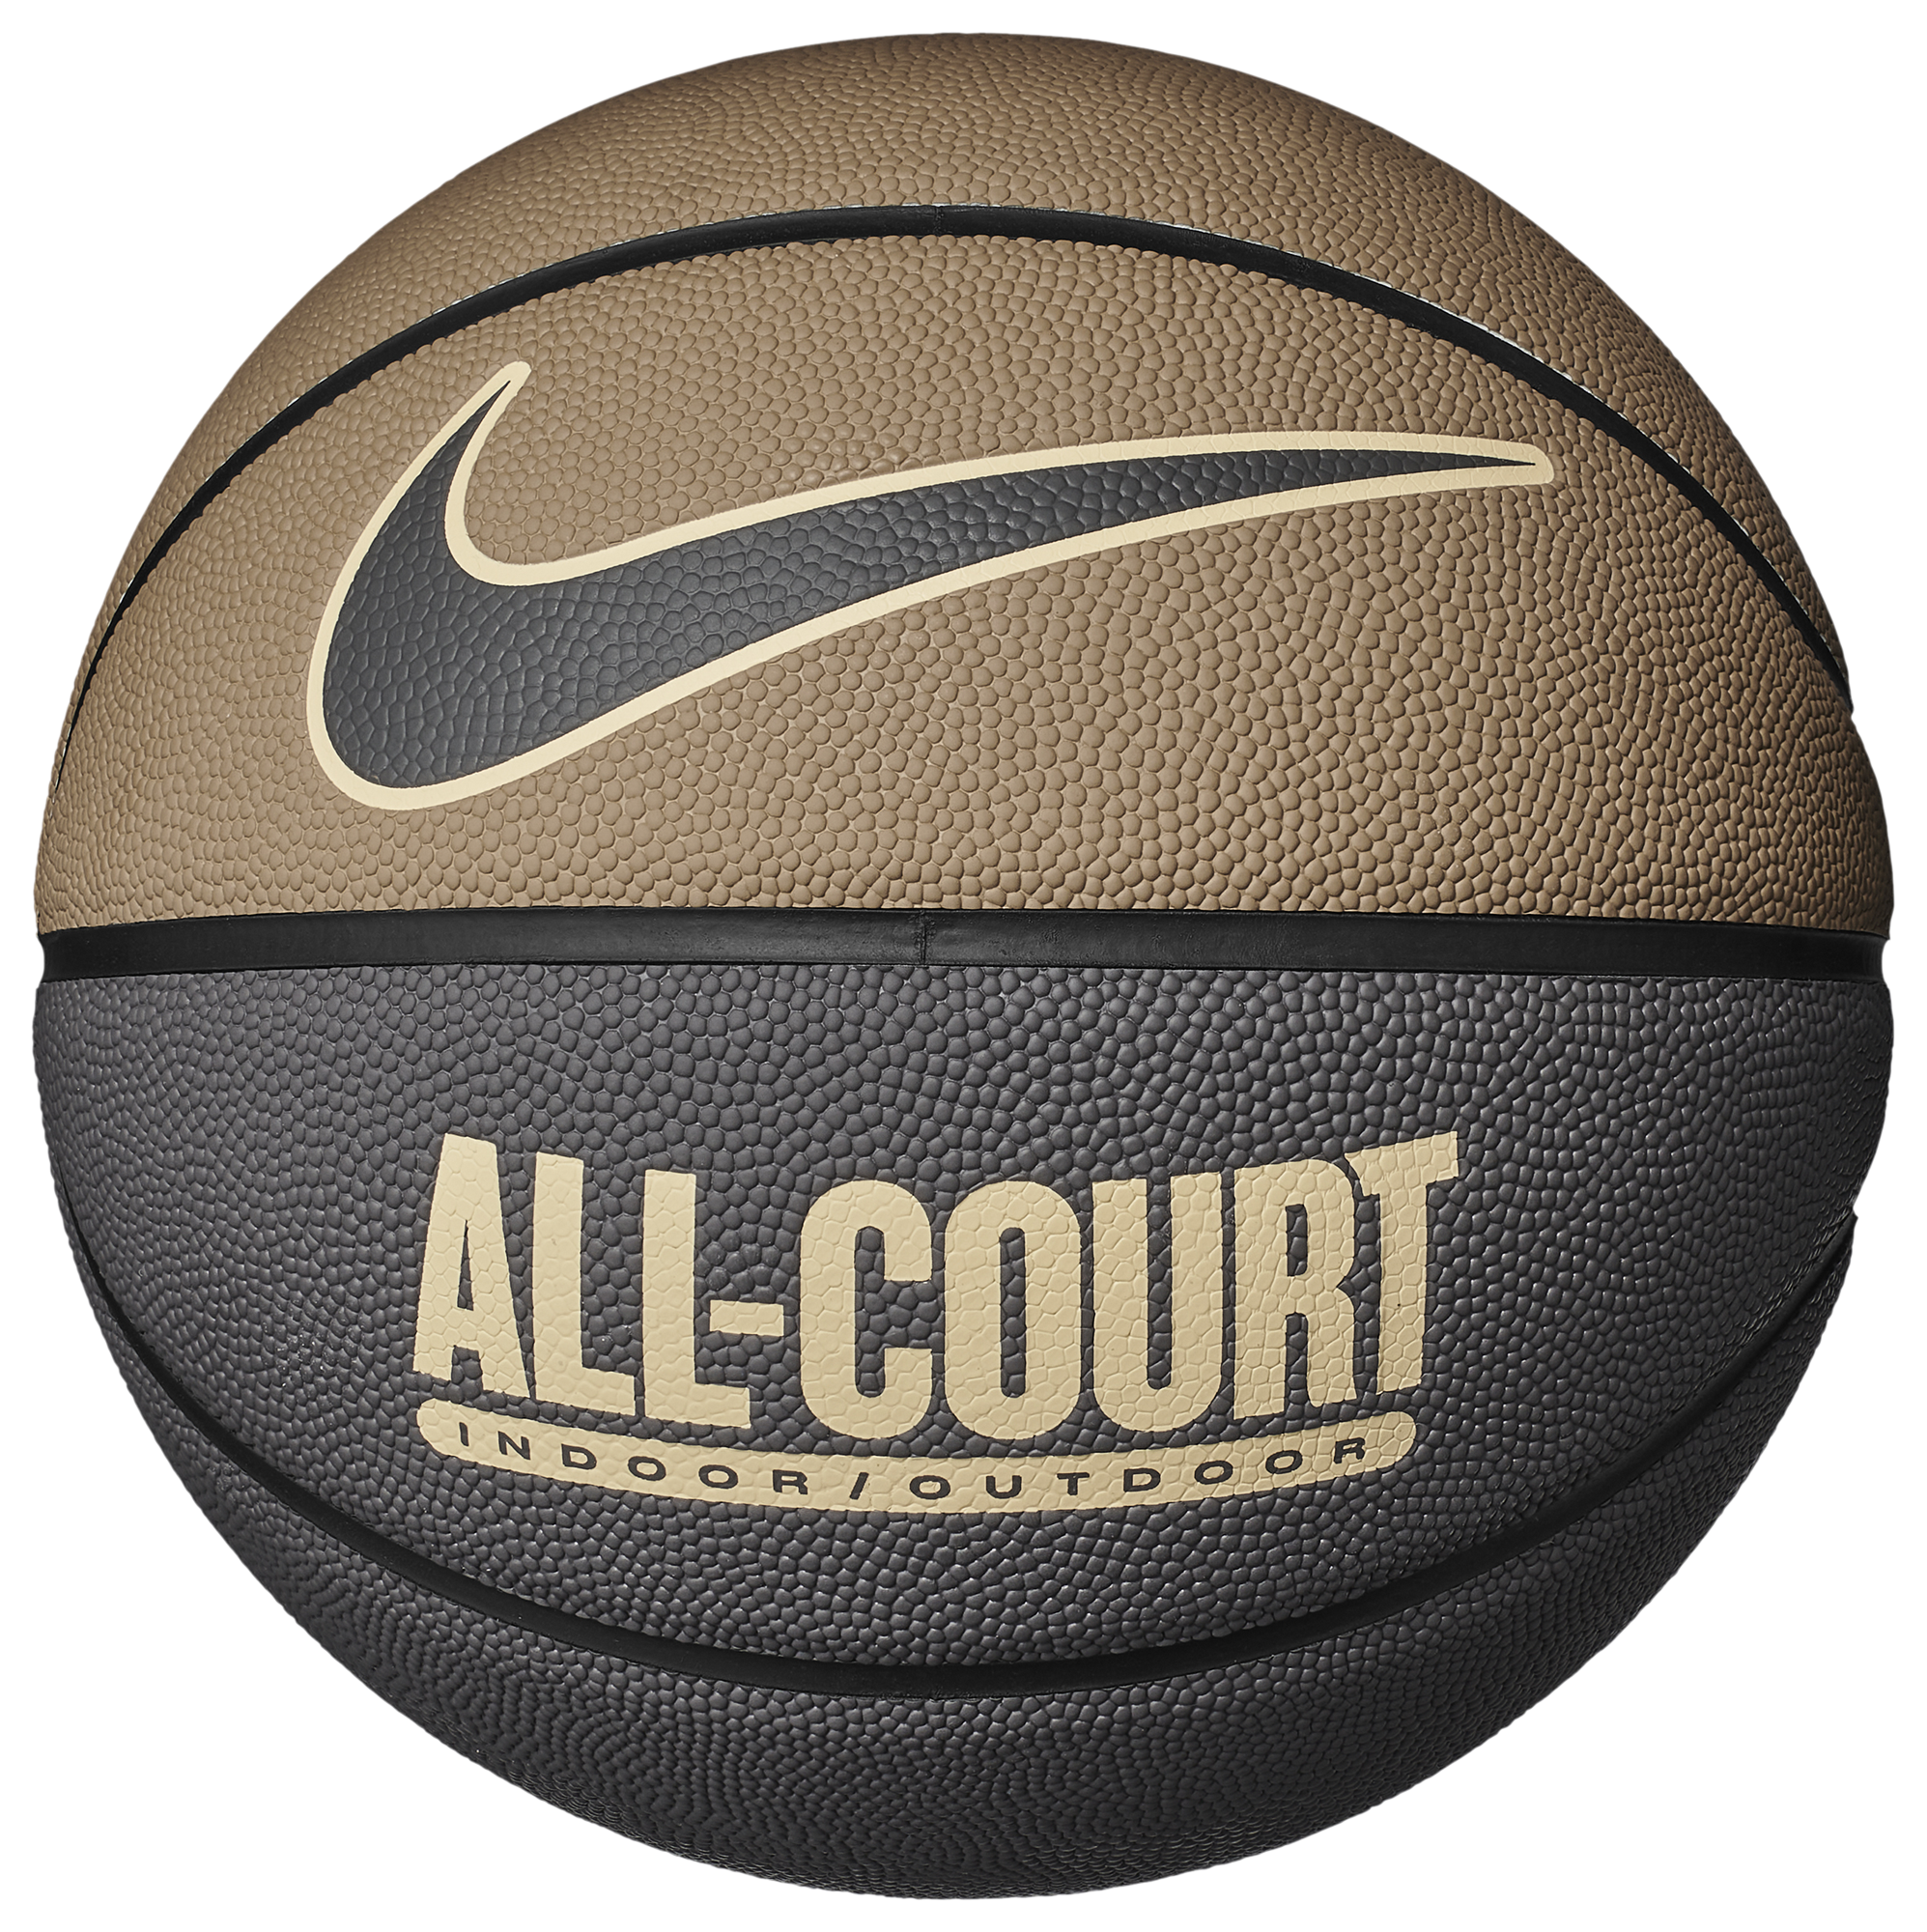 Nike Everyday All Court Basketball | Champs